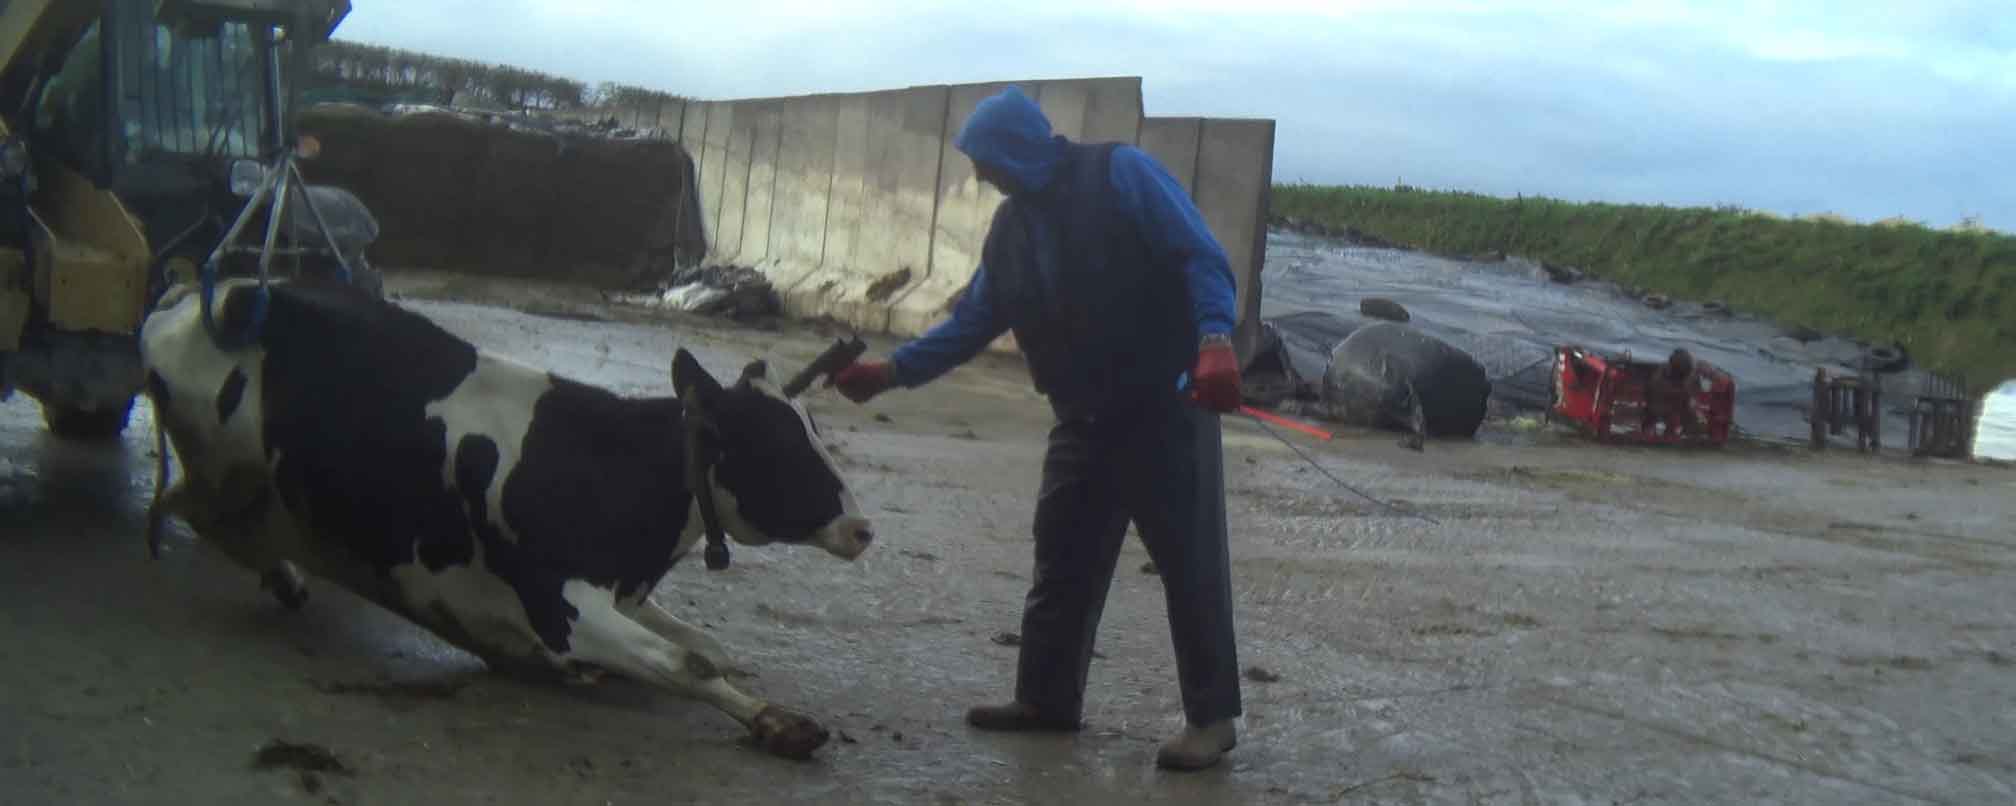 Farm worker killing a cow in the UK